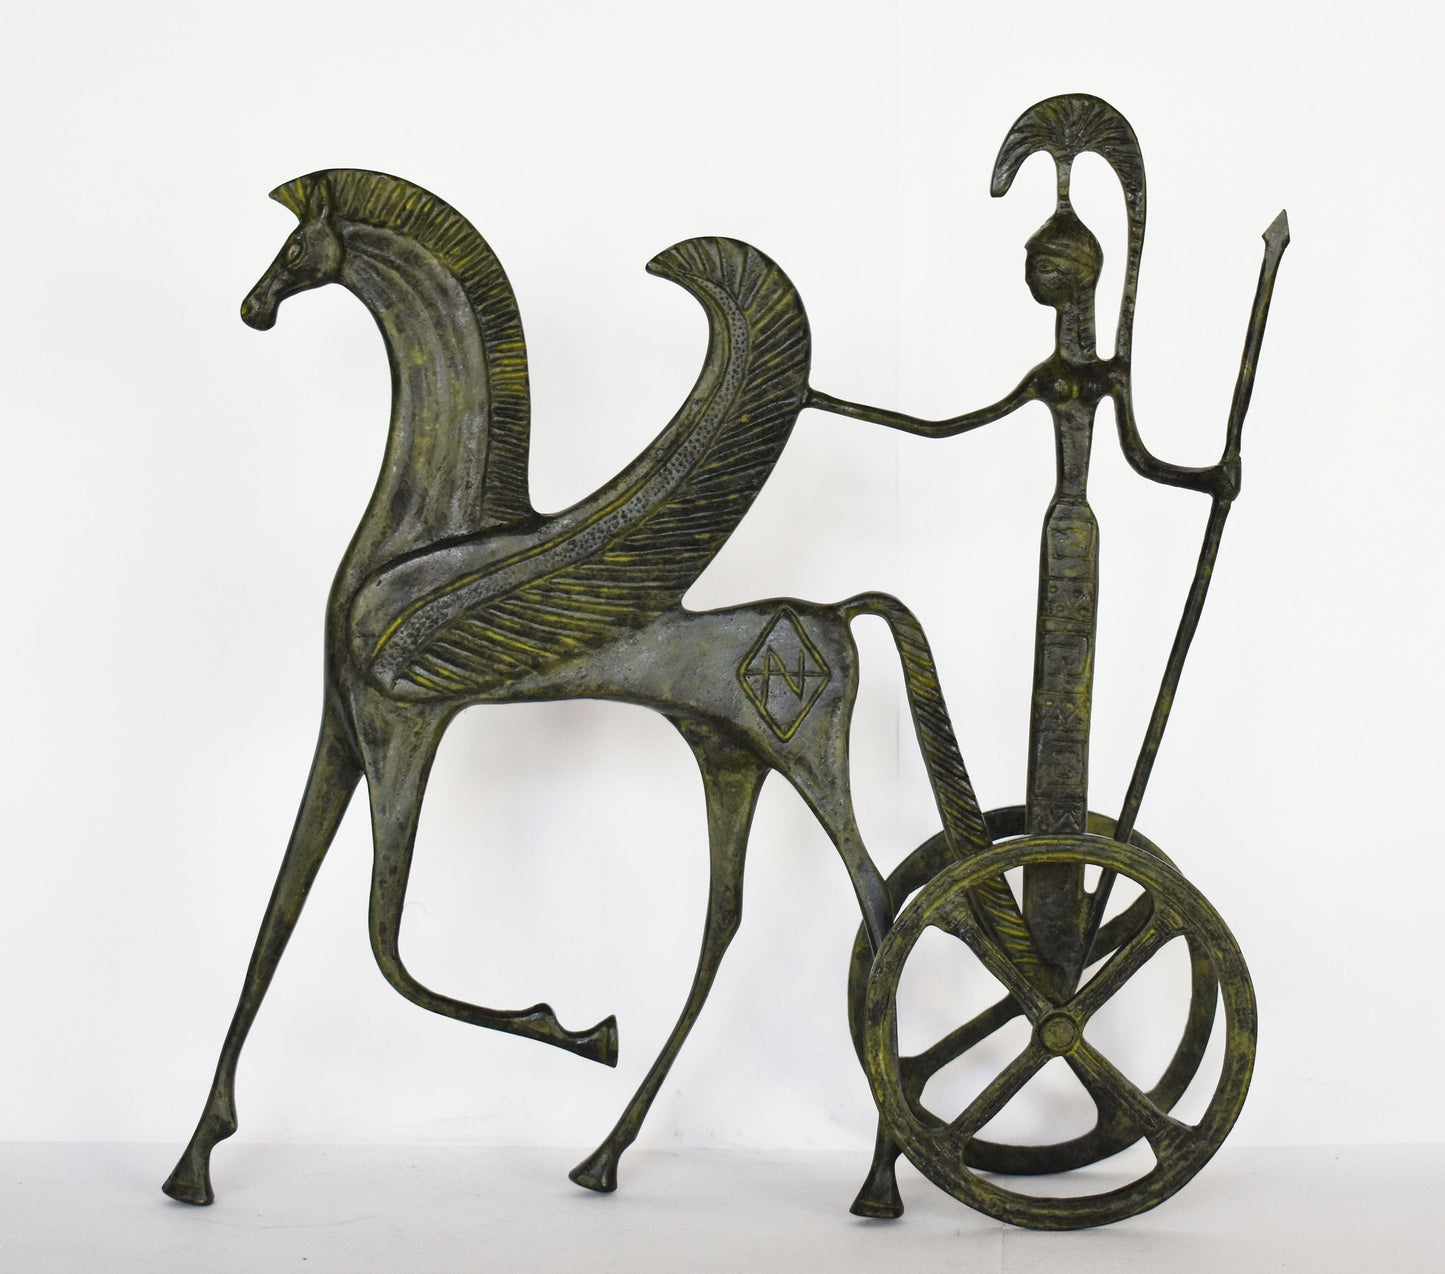 Ancient  Greek Chariot - Goddess Athena with Spear and Pegasus, the Flying Horse - pure Bronze Sculpture